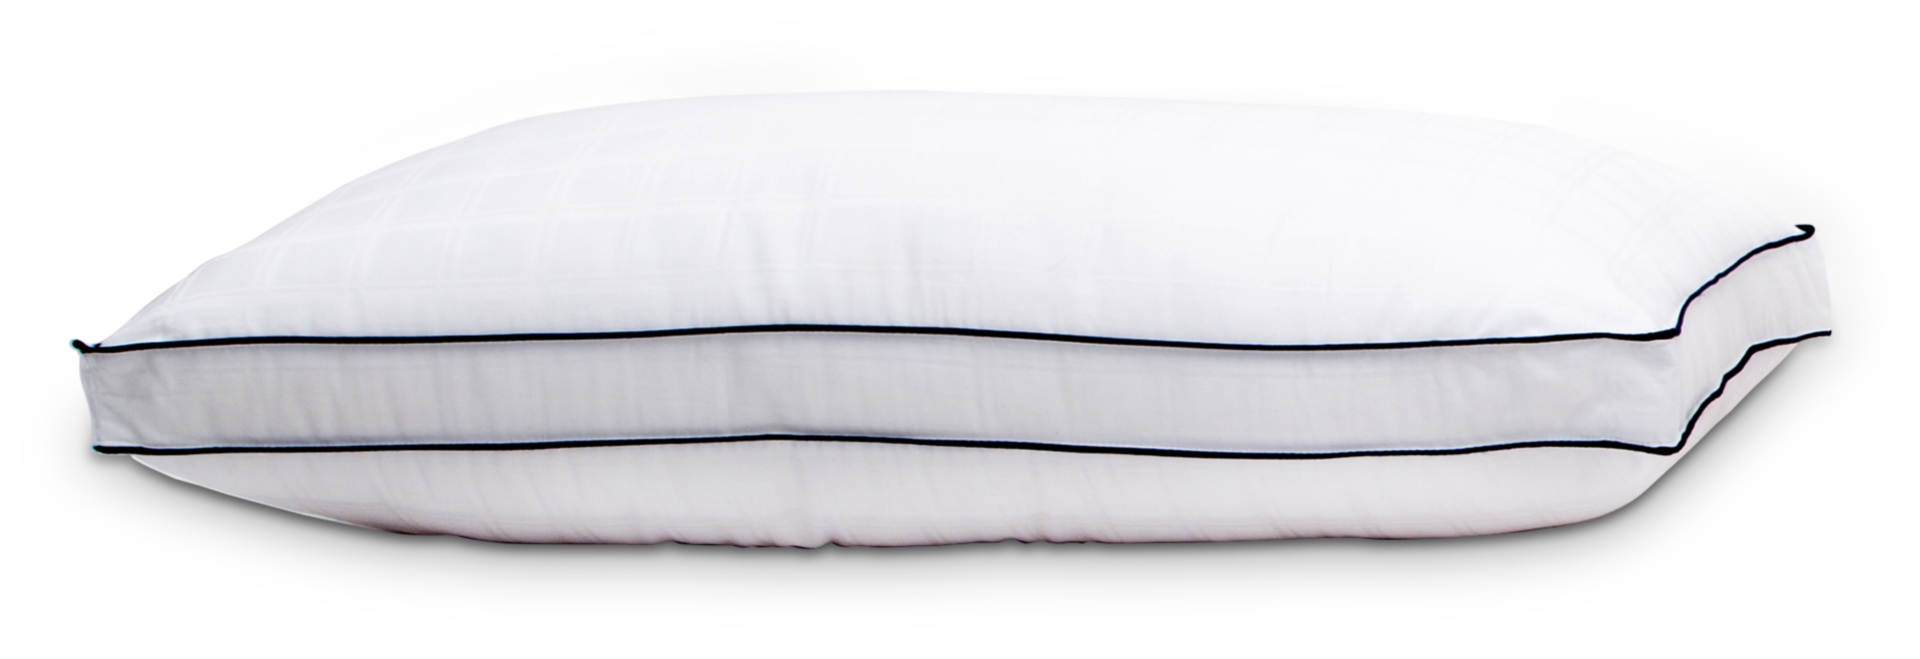 doctors choice firm pillow